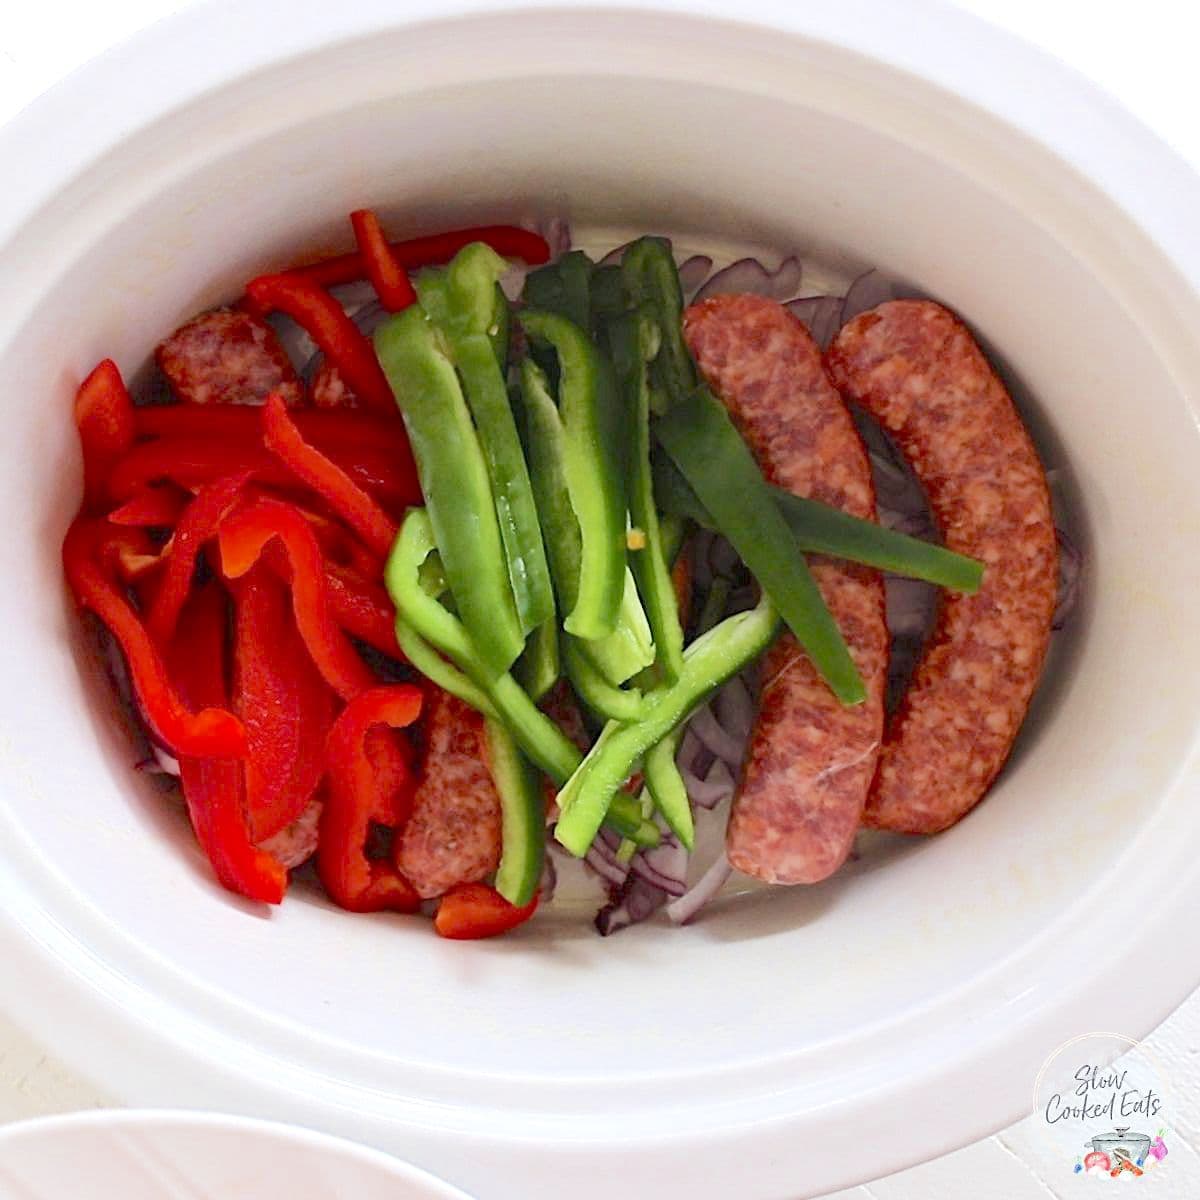 Adding the Italian sausages, bell peppers, and onion in a white crock pot.